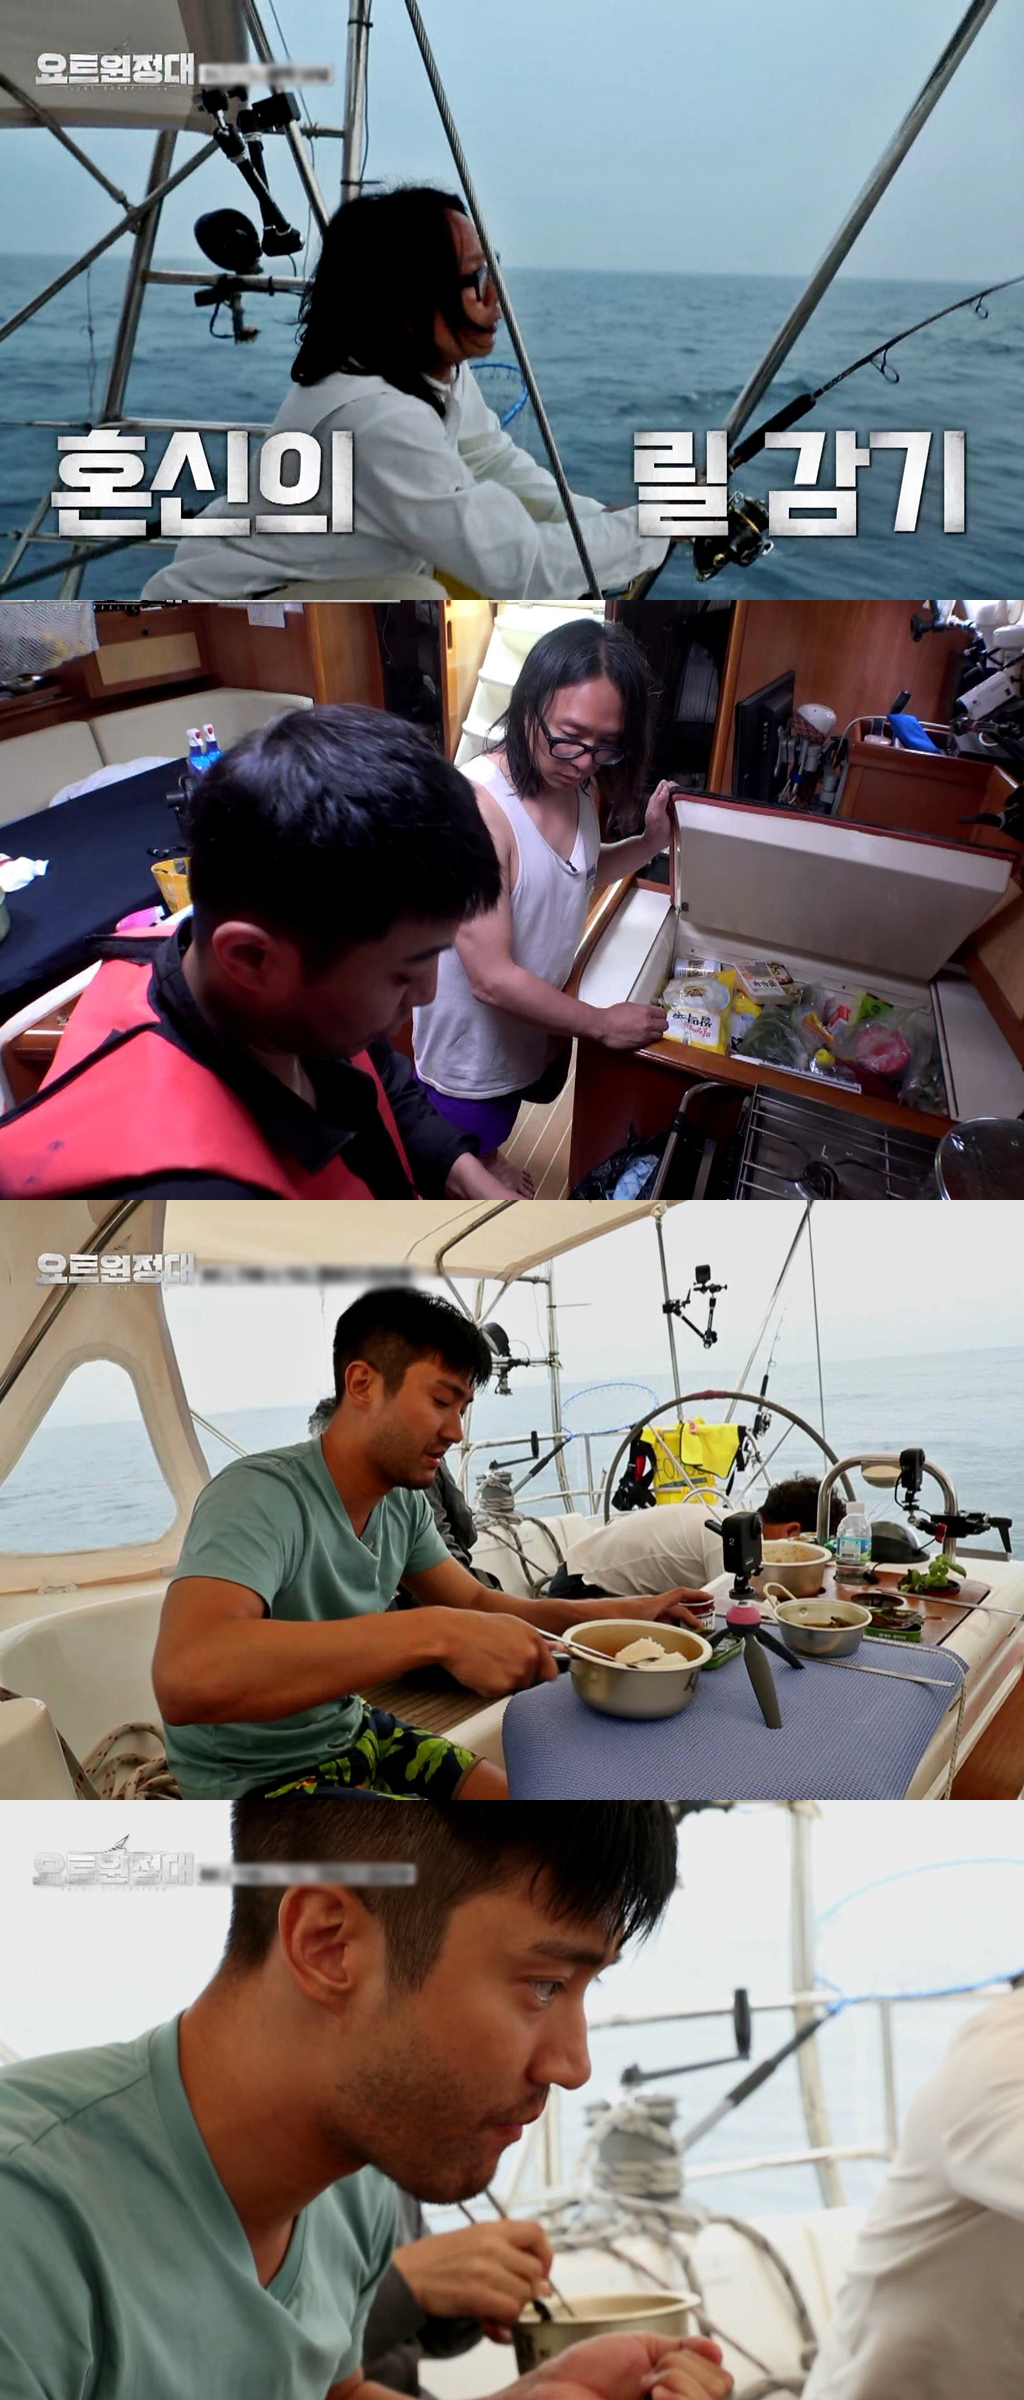 Choi Siwon overcomes seasickness with Jin Goo, Song Ho-joon boiled Maeun-tangIn the 4th episode of the yacht Expedition, which will be broadcast on the 7th, the members are drawn on the 4th day of the voyage.From the dawn of this day, Song Ho-joon turned into a sea-going river, and he was hot on the yacht, raising his enthusiasm for fishing.Song Ho-joon, who claimed to be in charge of the yacht expedition collection activities, showed his passion for taking fishing tools and revealed his dream for fishing.Song Ho-joon, who finally got a chance on the 4th day, was excited by the unusual movement of the fishing line, and the crew members also expressed their expectation of what kind of fishing would be caught.In the meantime, the members of the Maeun-tang tasting on the yacht are revealed, raising the question of what the Maeun-tang material will be.Jin Goo and Song Ho-joon, who are on the meal, opened a sushi restaurant on the yacht and made Maeun-tang with fresh ingredients.Choi Siwon, who was suffering from seasickness, said he showed his eyes flashing in the Maeun-tang they made.The expectation is high for the fourth story of Song Ho-joons fishing, which was about to catch a big fish, and the twists and turns yacht Expedition, which was made by Maeun-tang, who was living up to Choi Siwon, who was struggling with the condition.iMBC Baek A-young  Photos Provided MBC Everlon